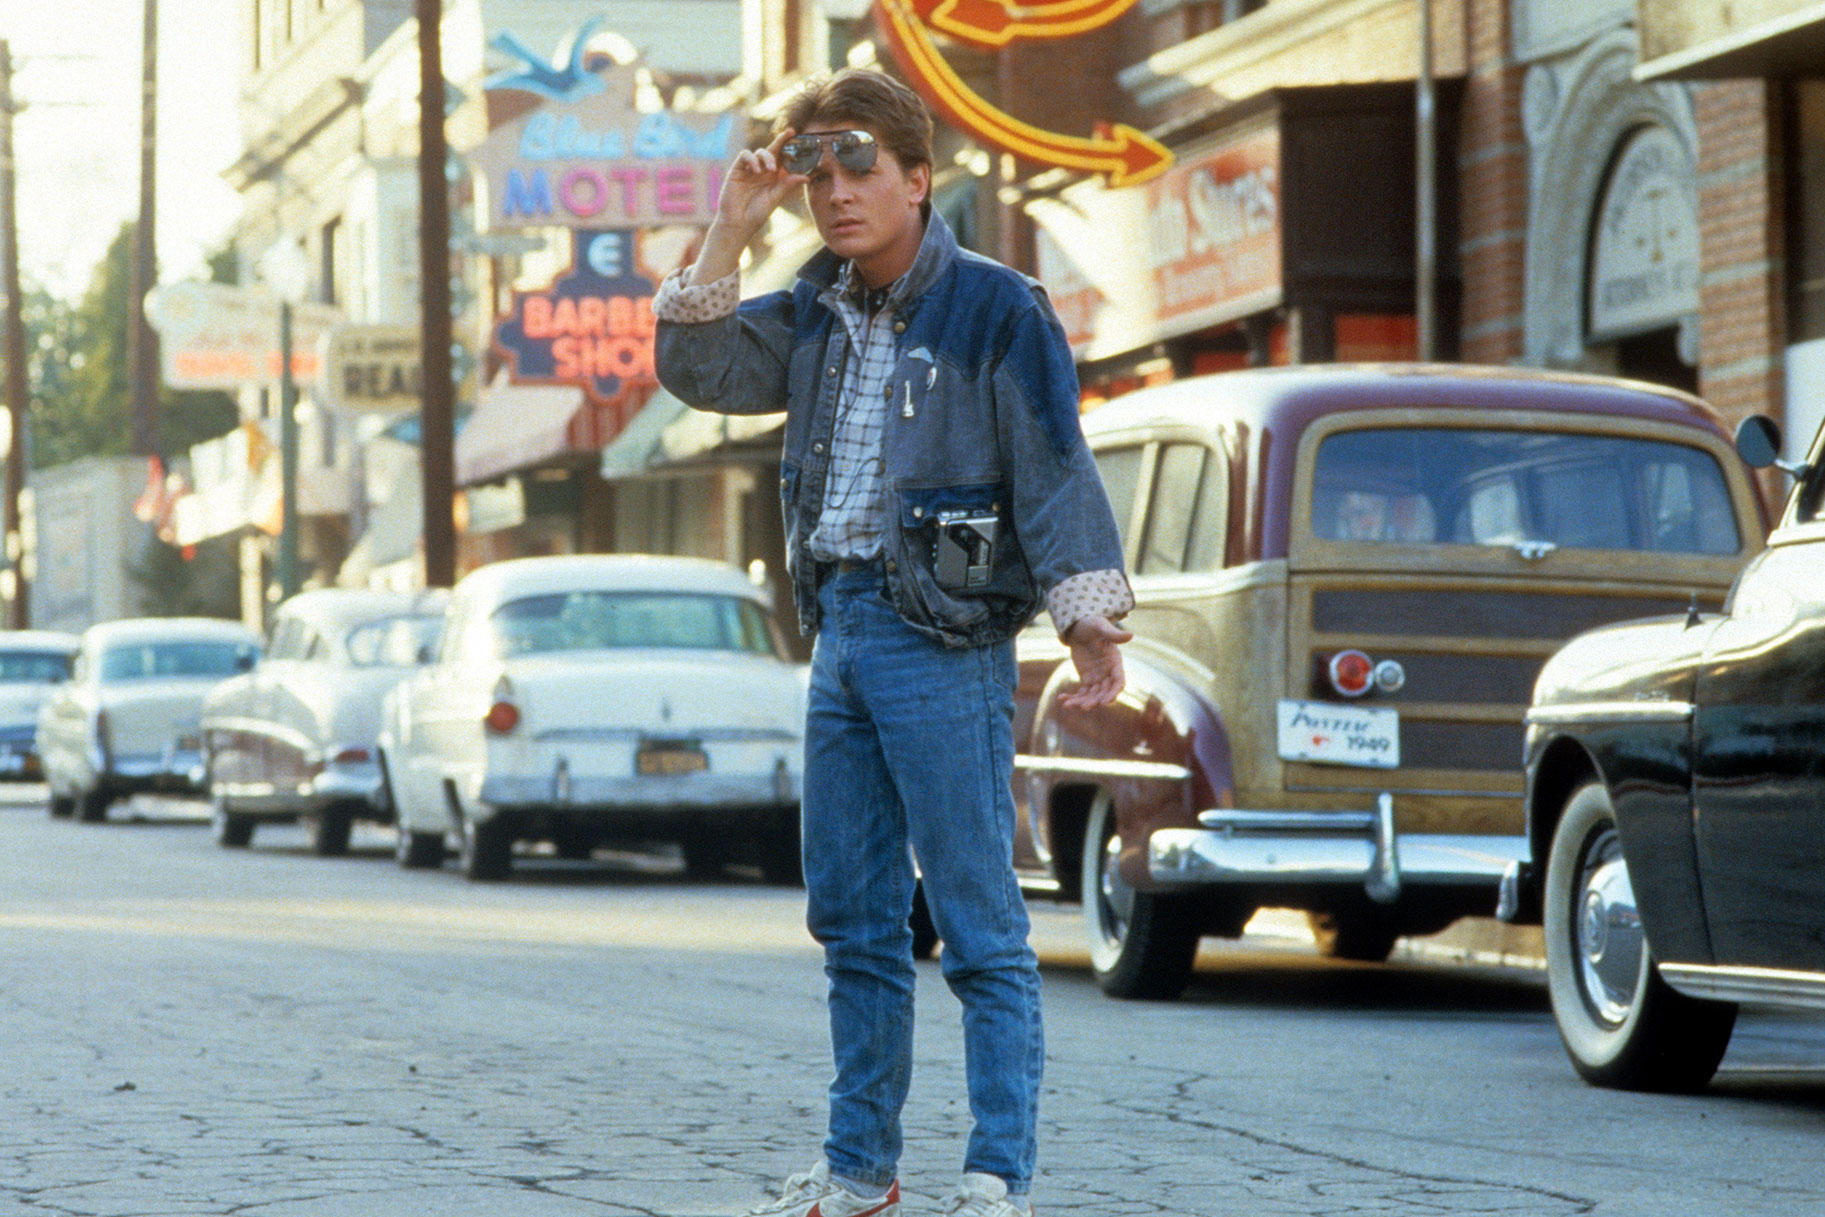 Michael J. Fox walking across the street in a scene from 'Back To The Future'